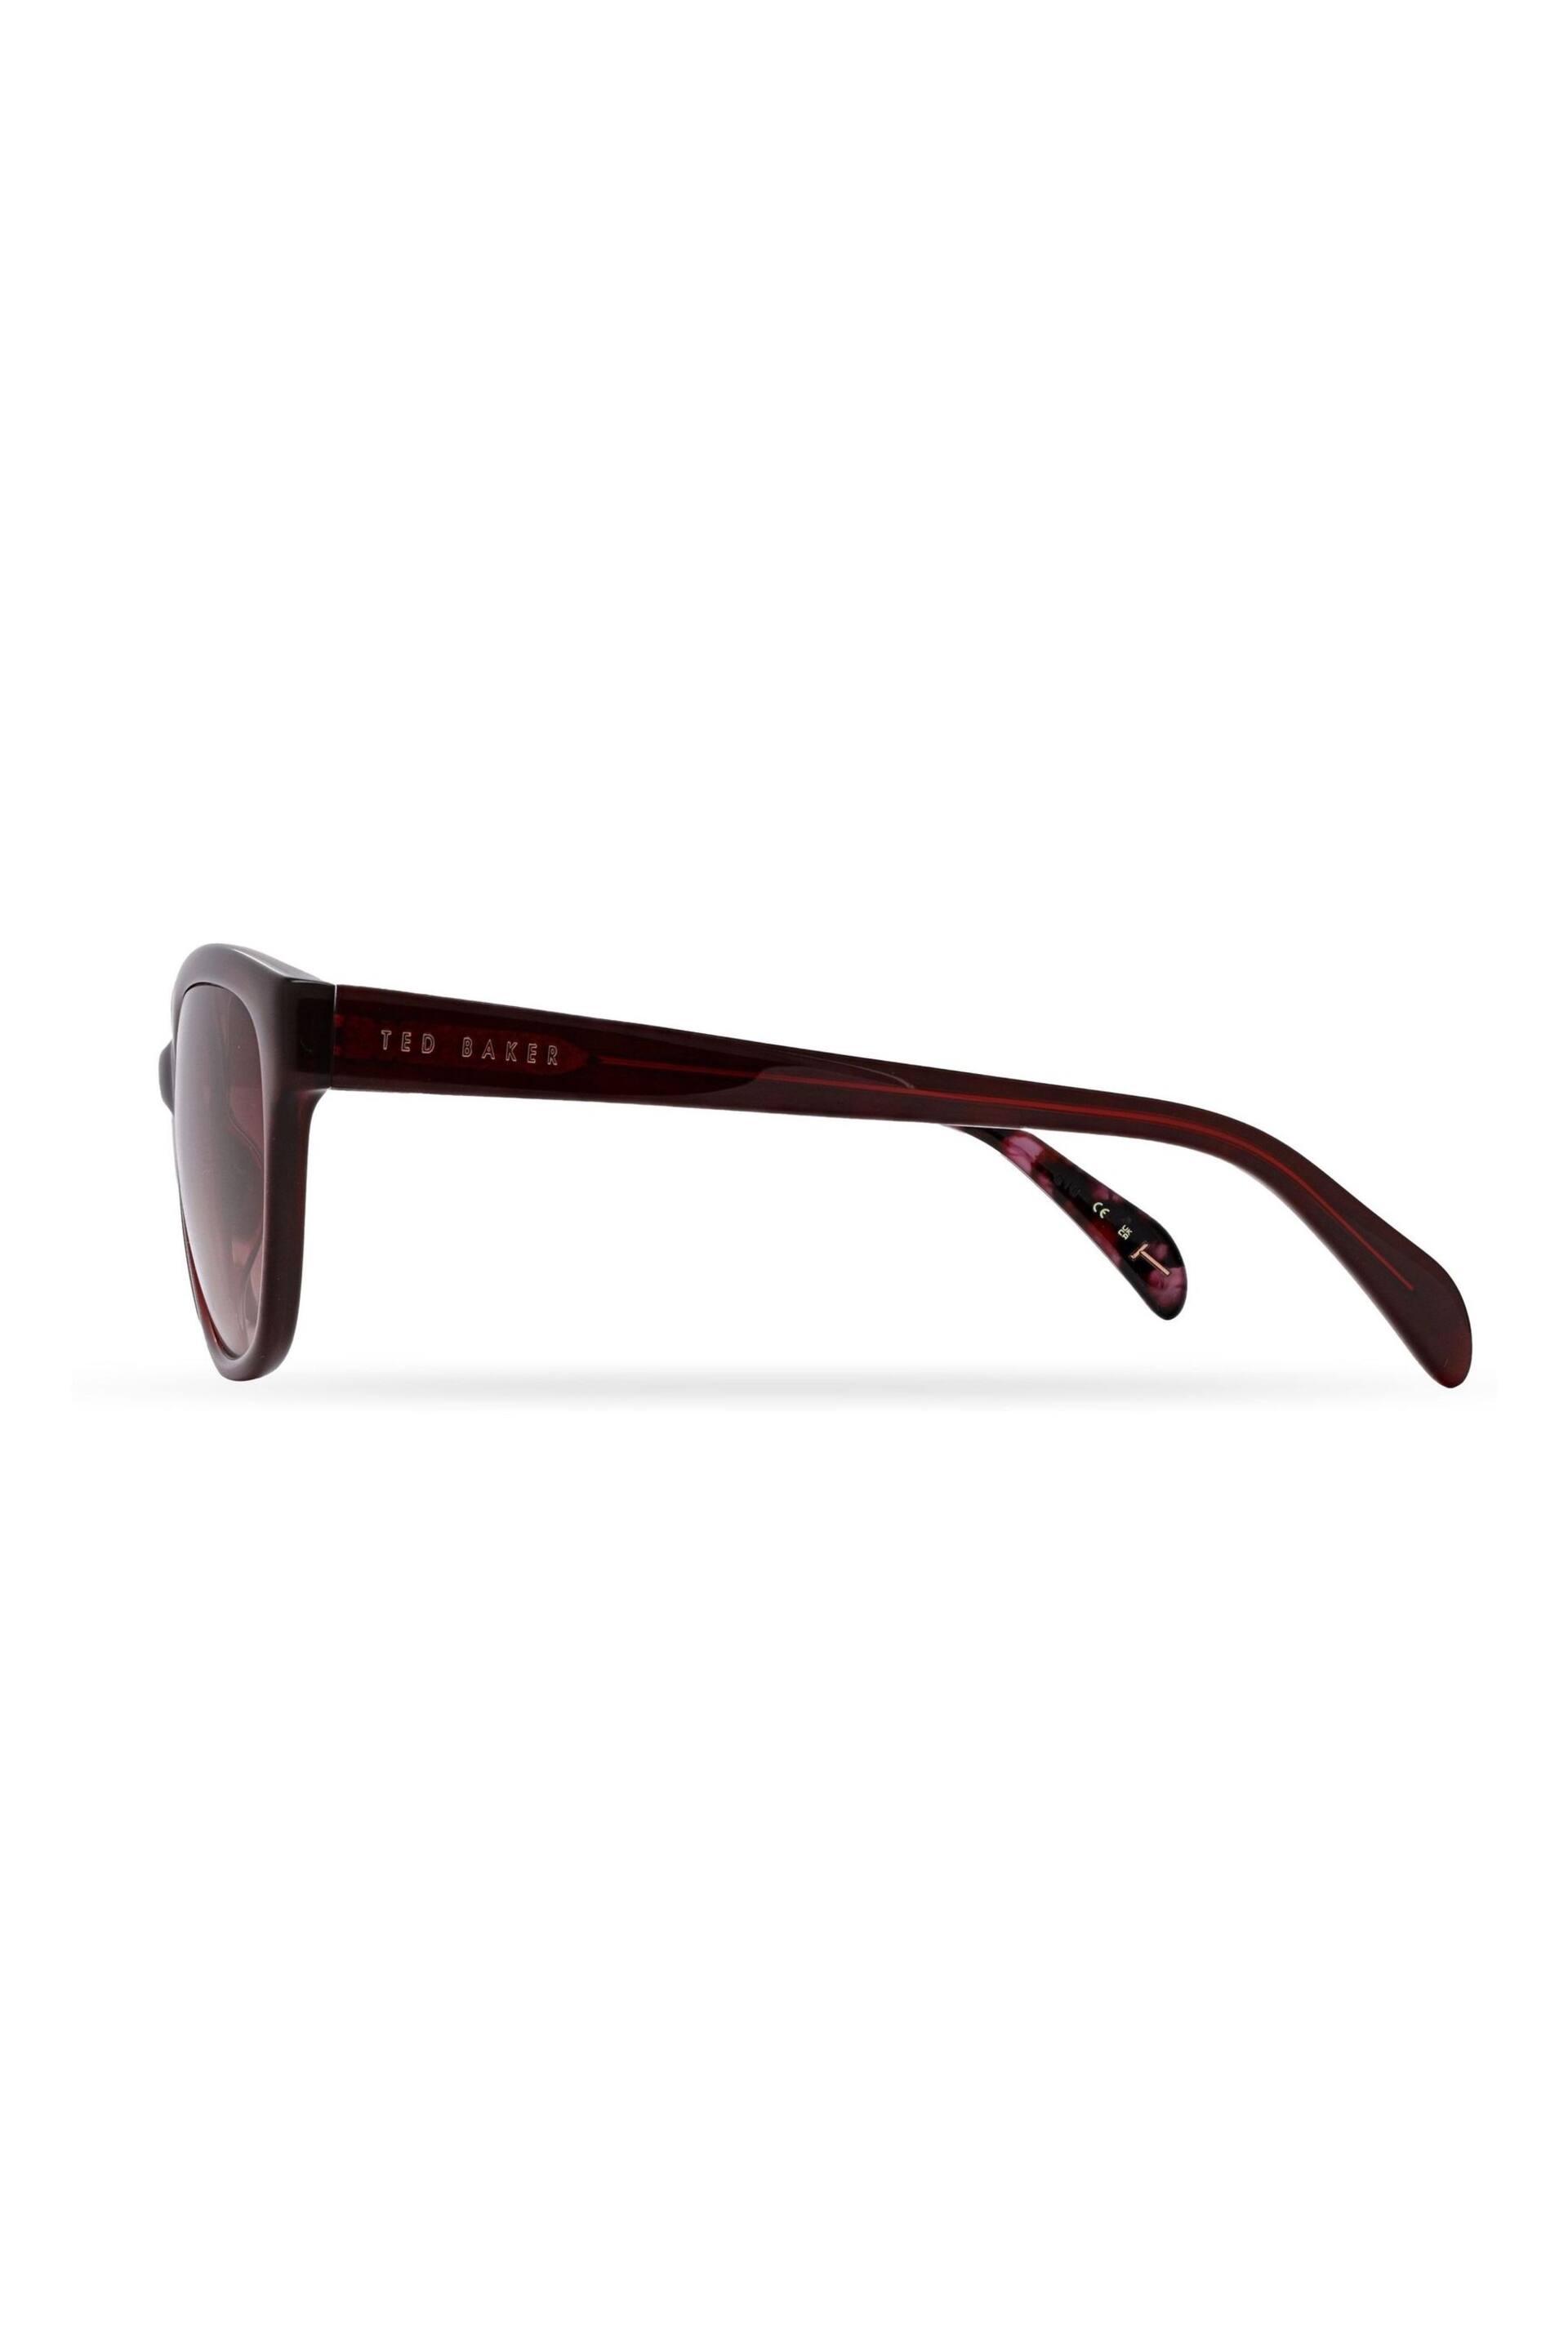 Ted Baker Red Amie Sunglasses - Image 3 of 5